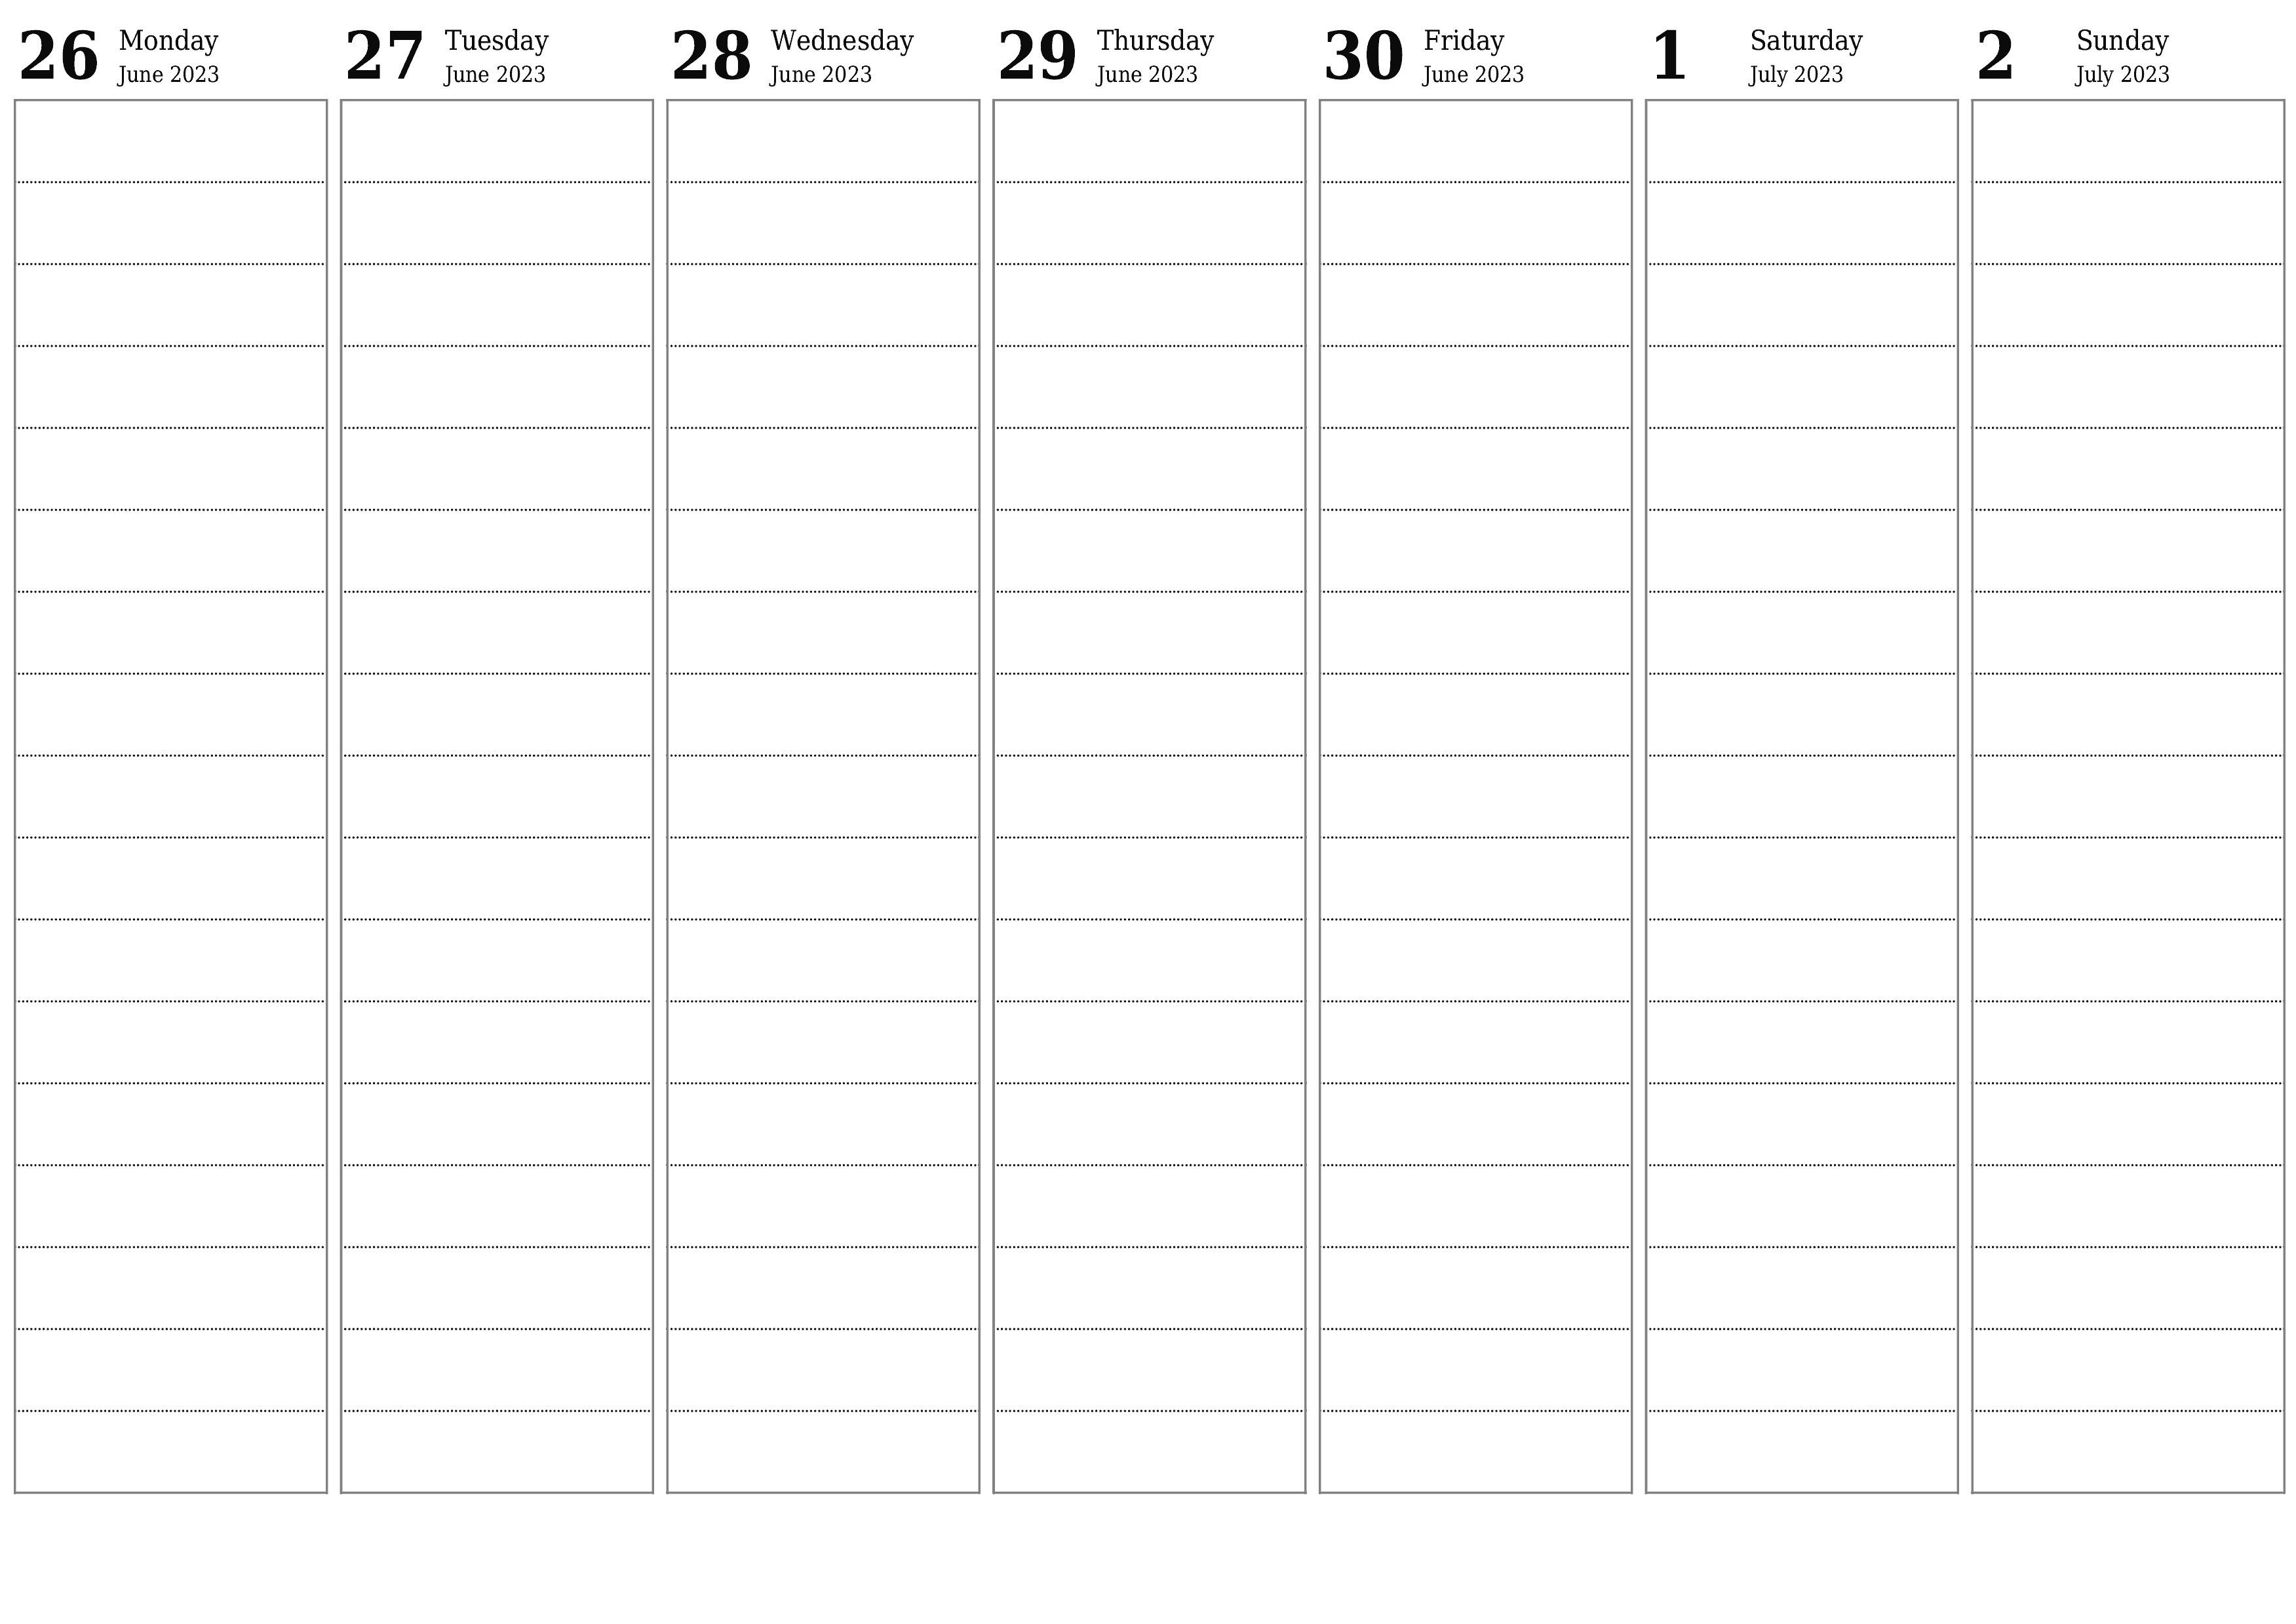 Blank weekly printable calendar and planner for week July 2023 with notes, save and print to PDF PNG English - 7calendar.com